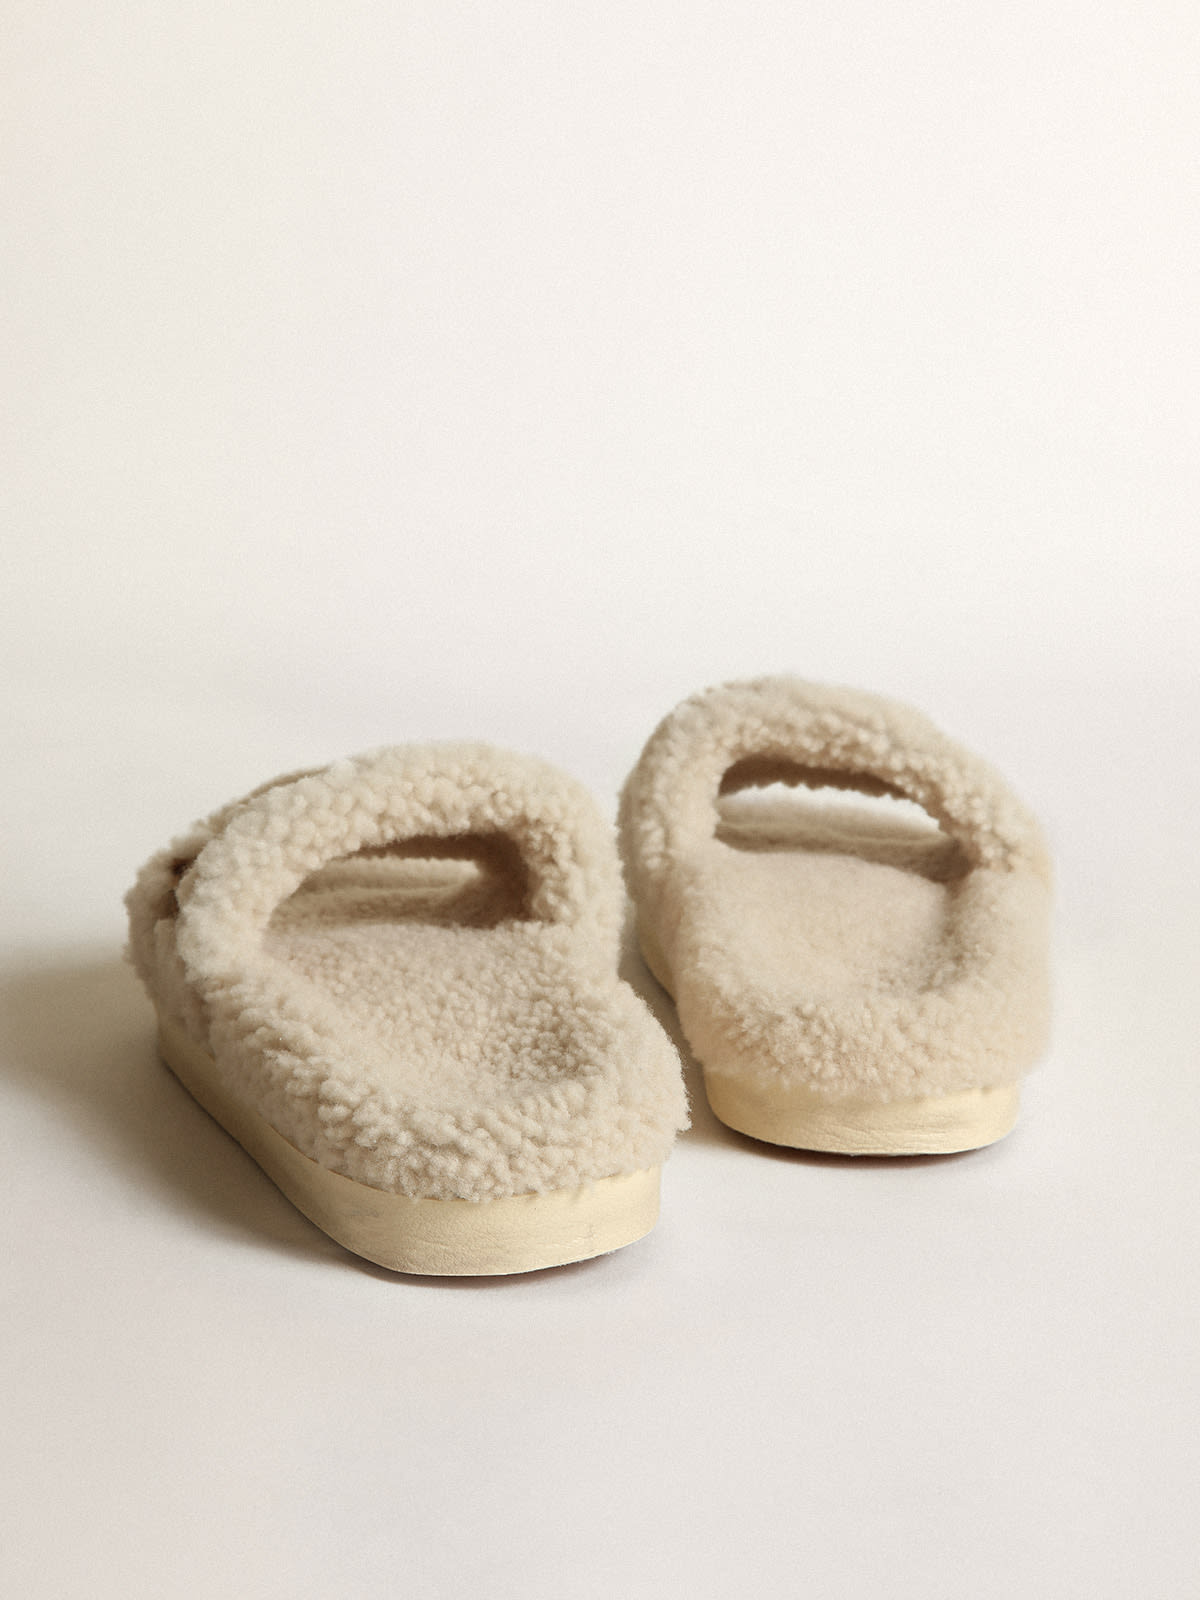 Golden Goose - Poolstar in beige shearling with leopard-print pony skin star in 